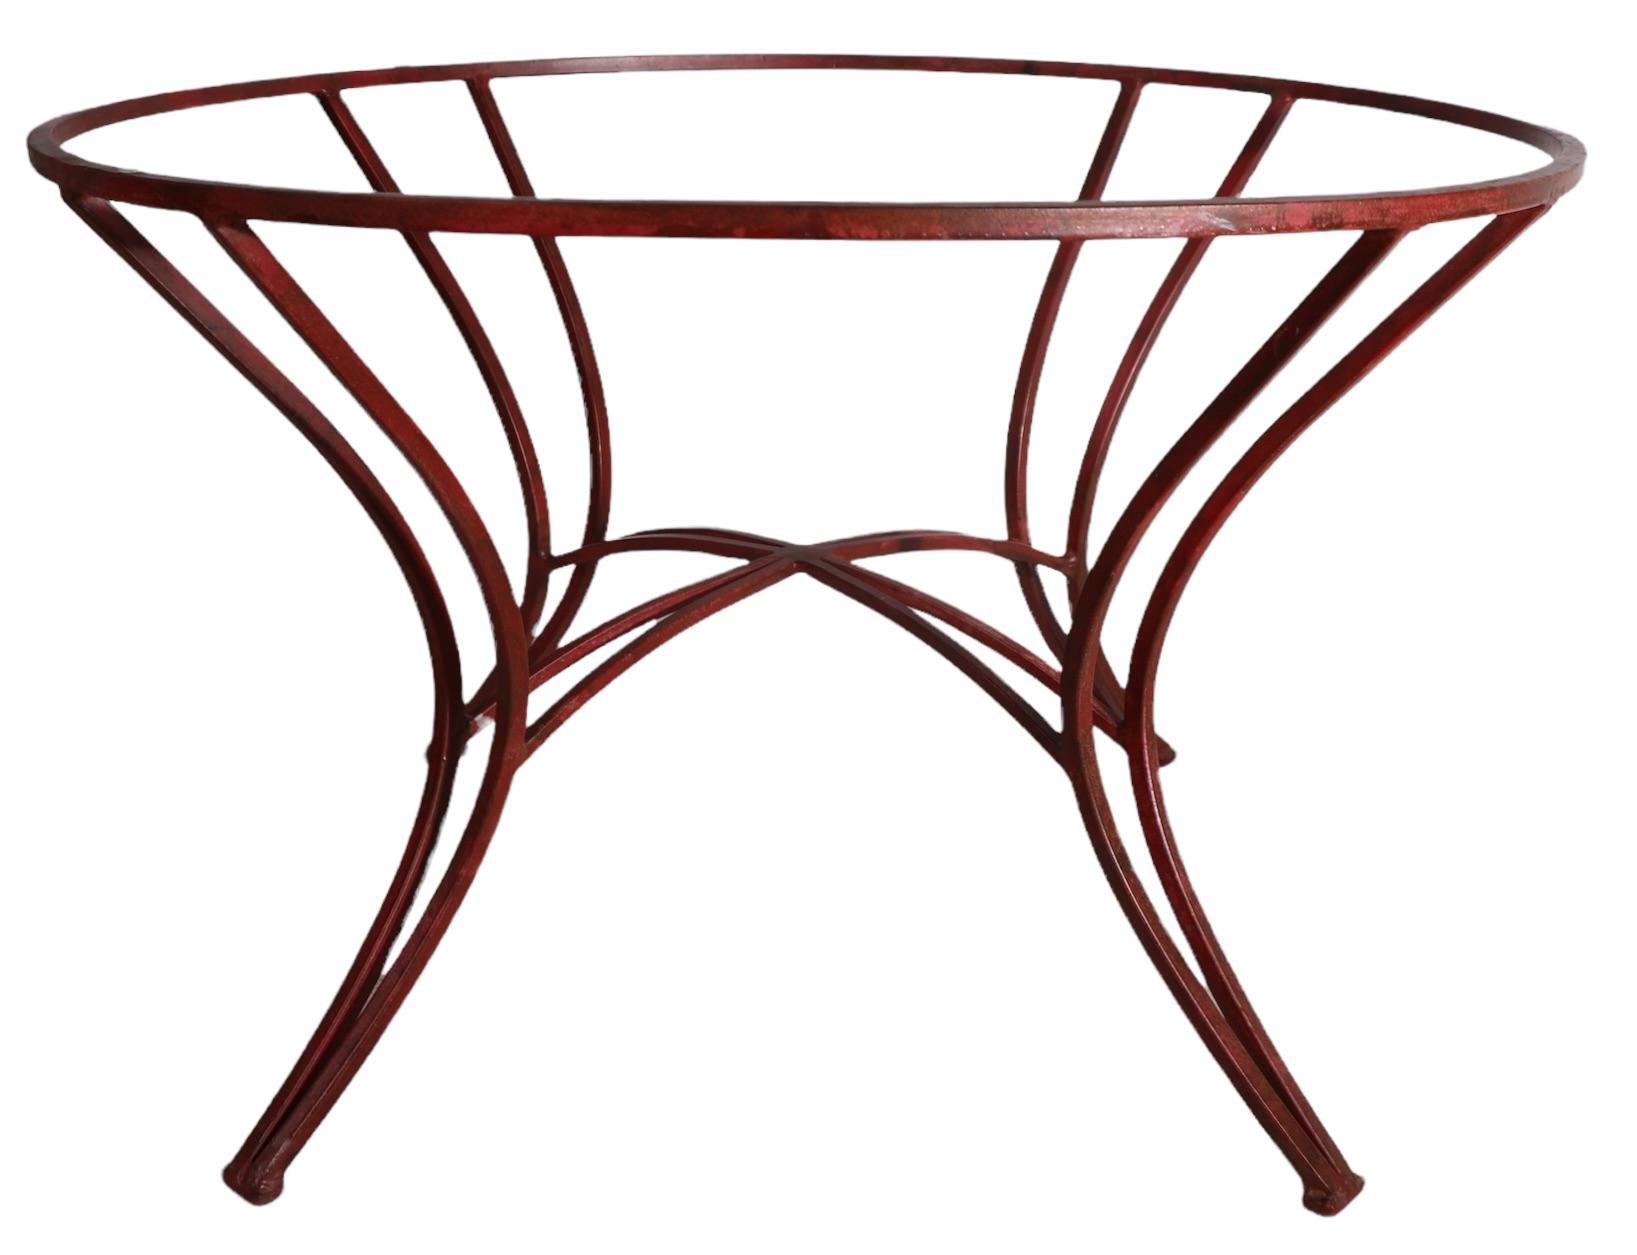 20th Century Wrought Iron and Glass Side Table Suitable for Patio, Garden or Poolside Use For Sale